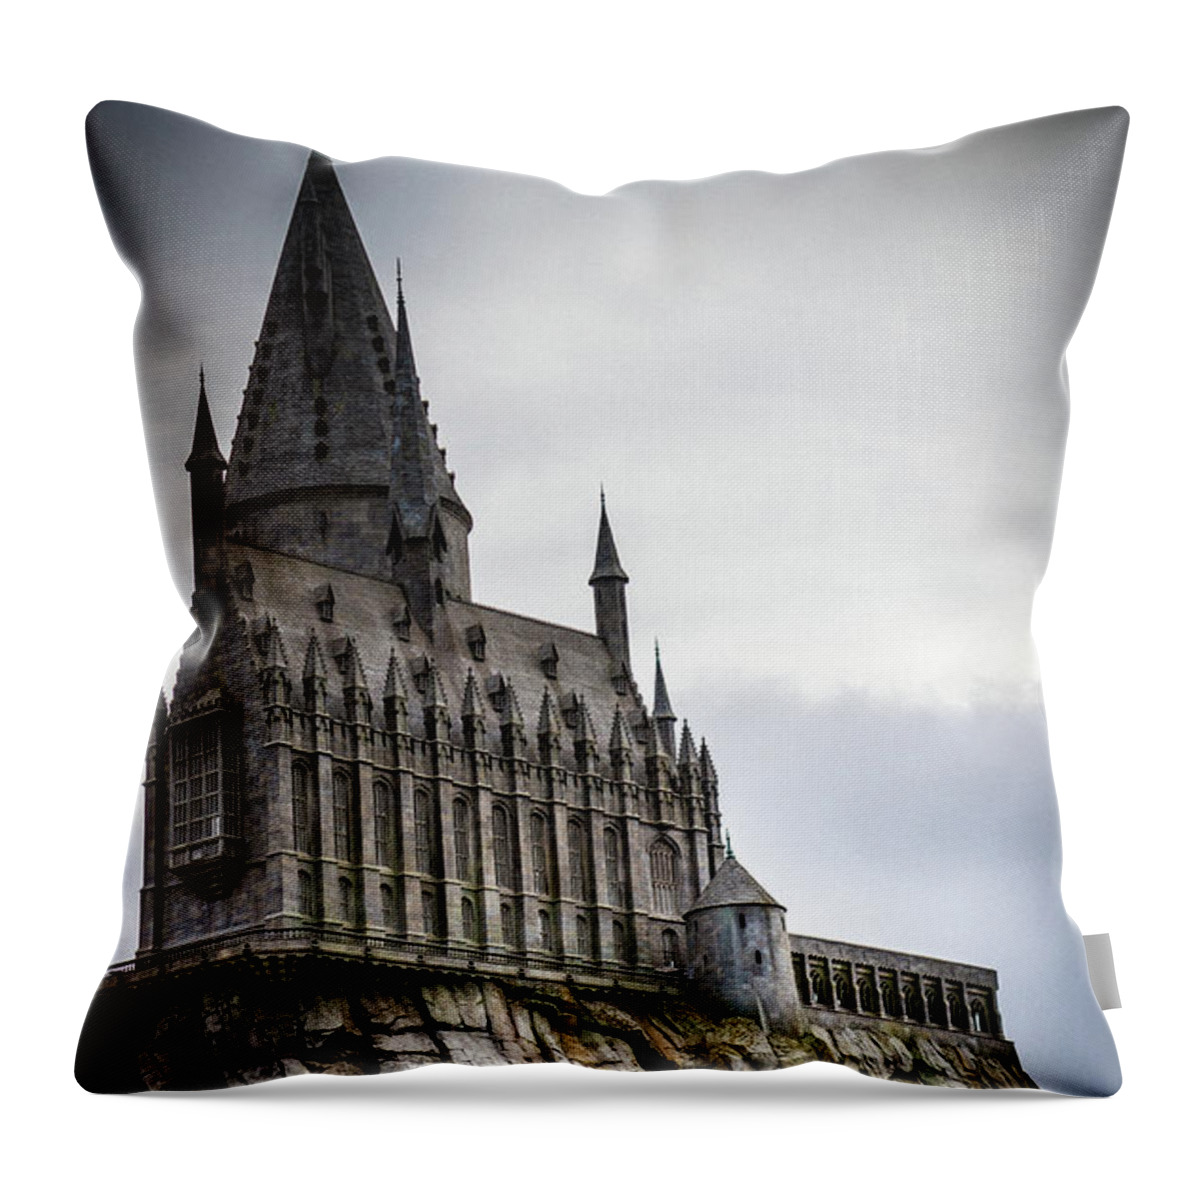 Castle Throw Pillow featuring the photograph Magical Place by Matthew Nelson